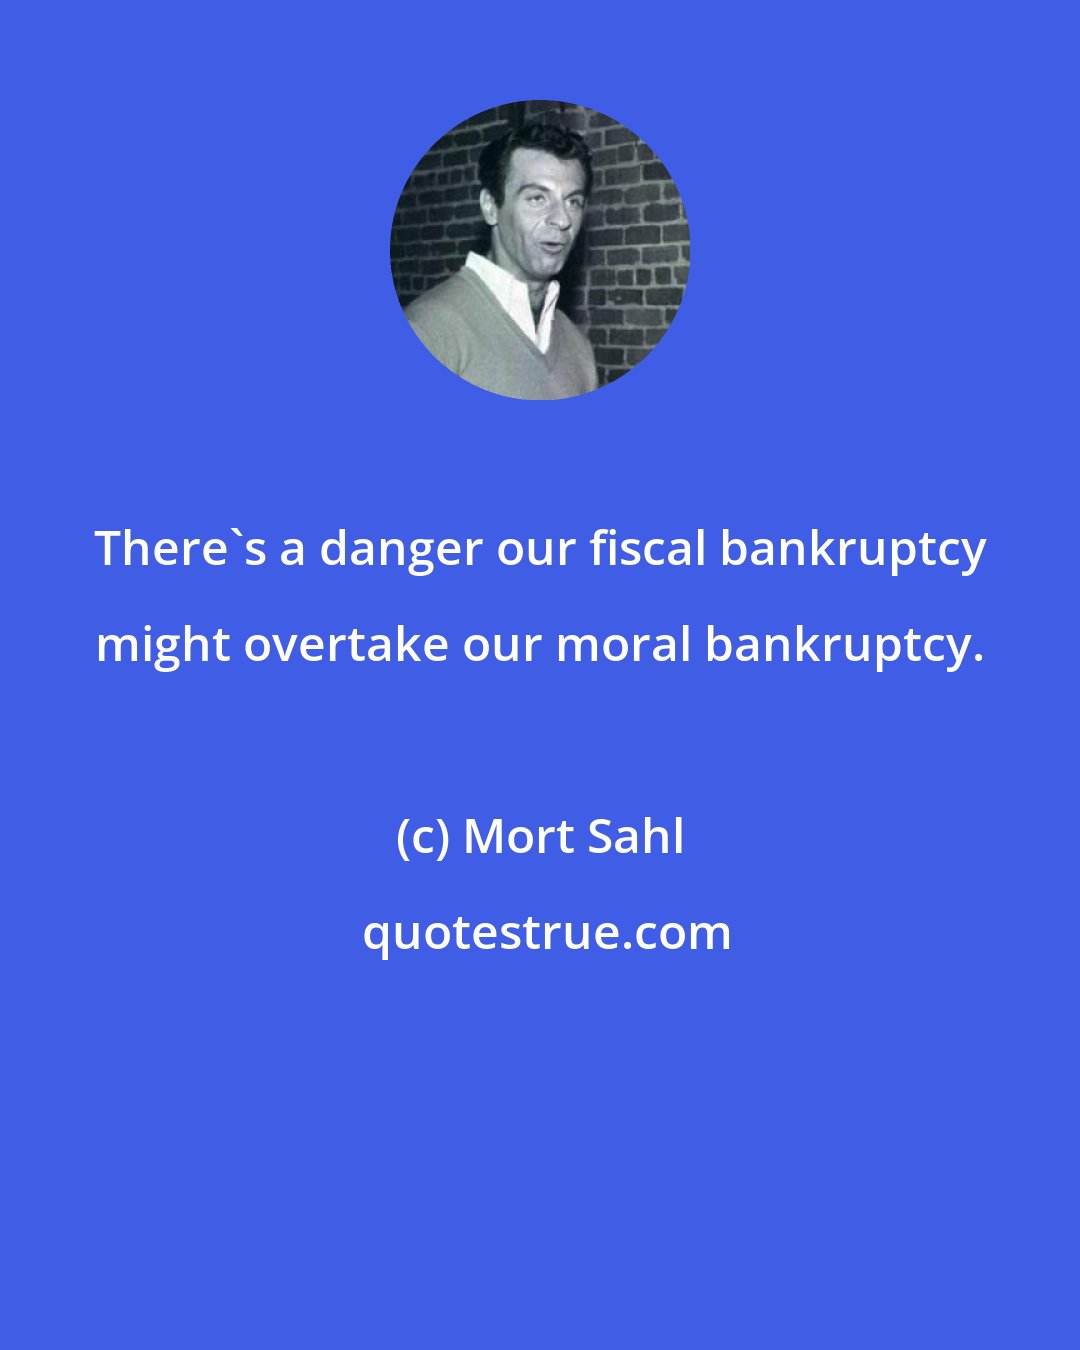 Mort Sahl: There's a danger our fiscal bankruptcy might overtake our moral bankruptcy.